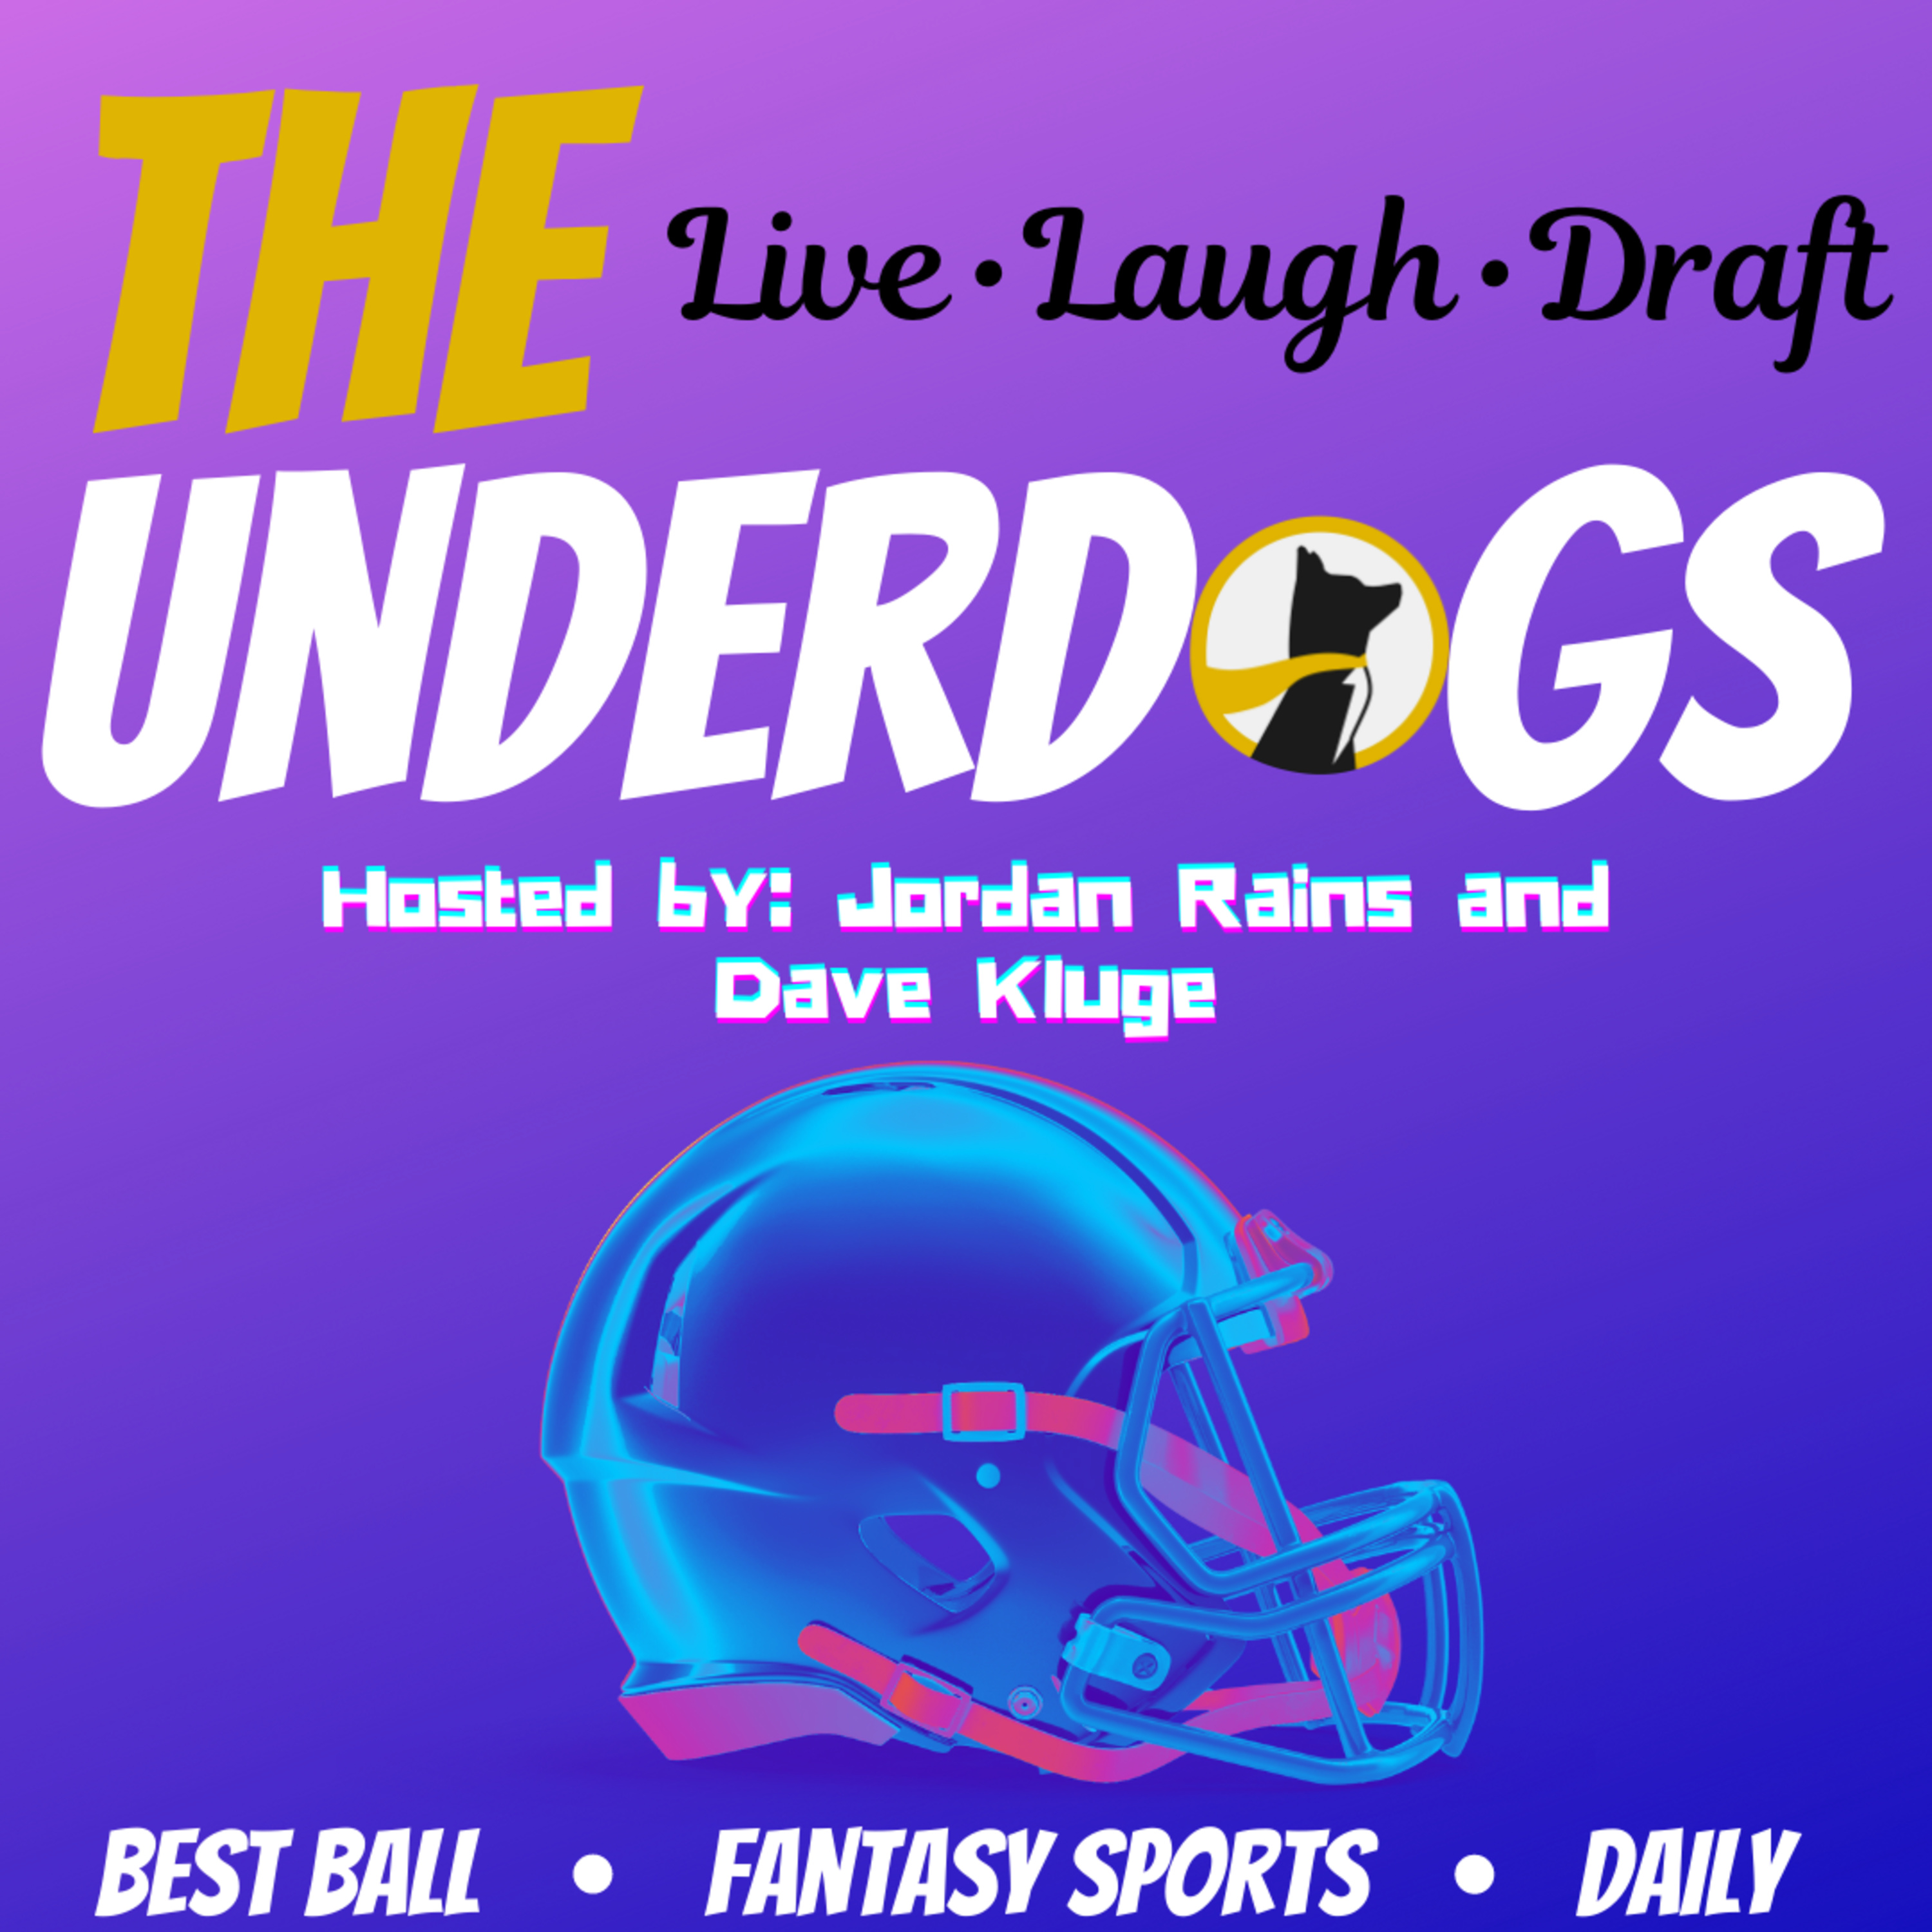 CROSSOVER EVENT! Week 5 Underdog Live Draft! | The Underdogs